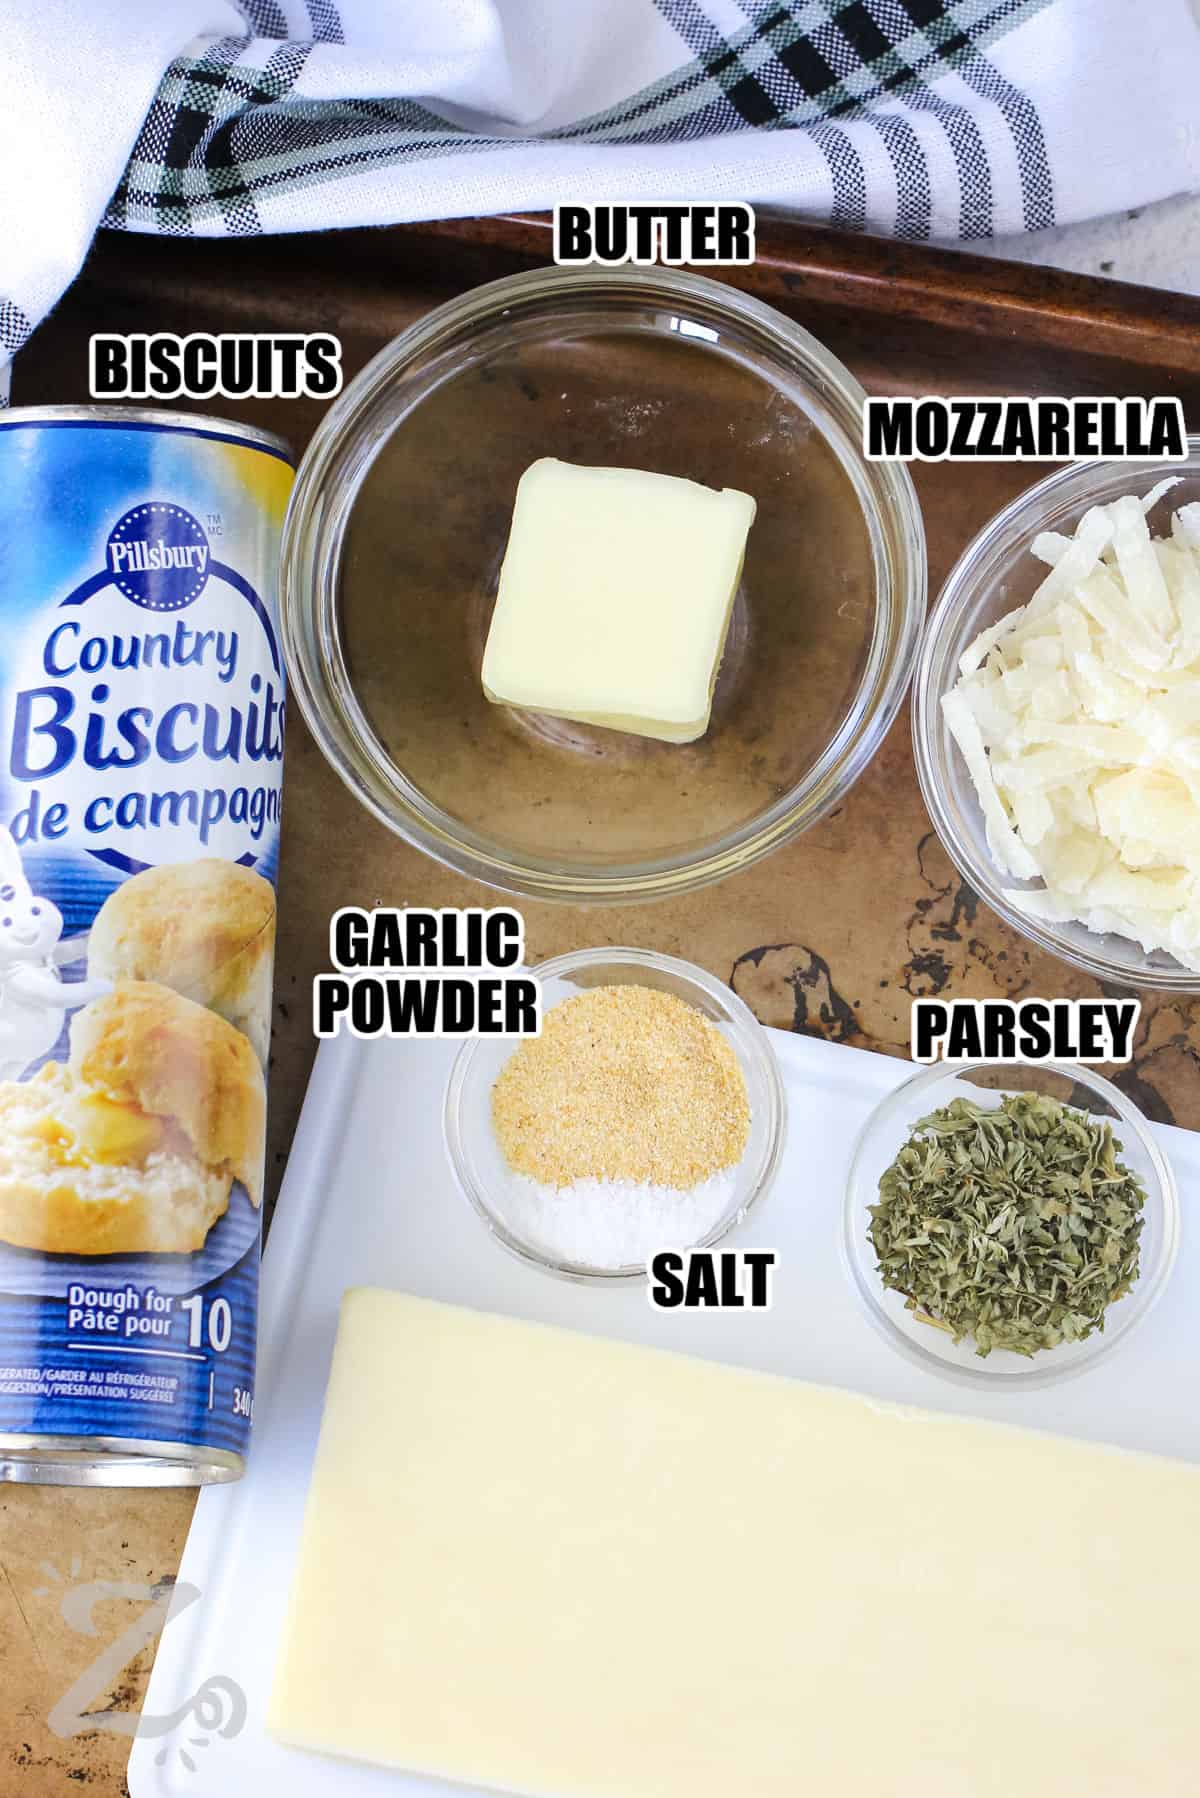 ingredients to make garlic cheese bombs labeled on a baking tray